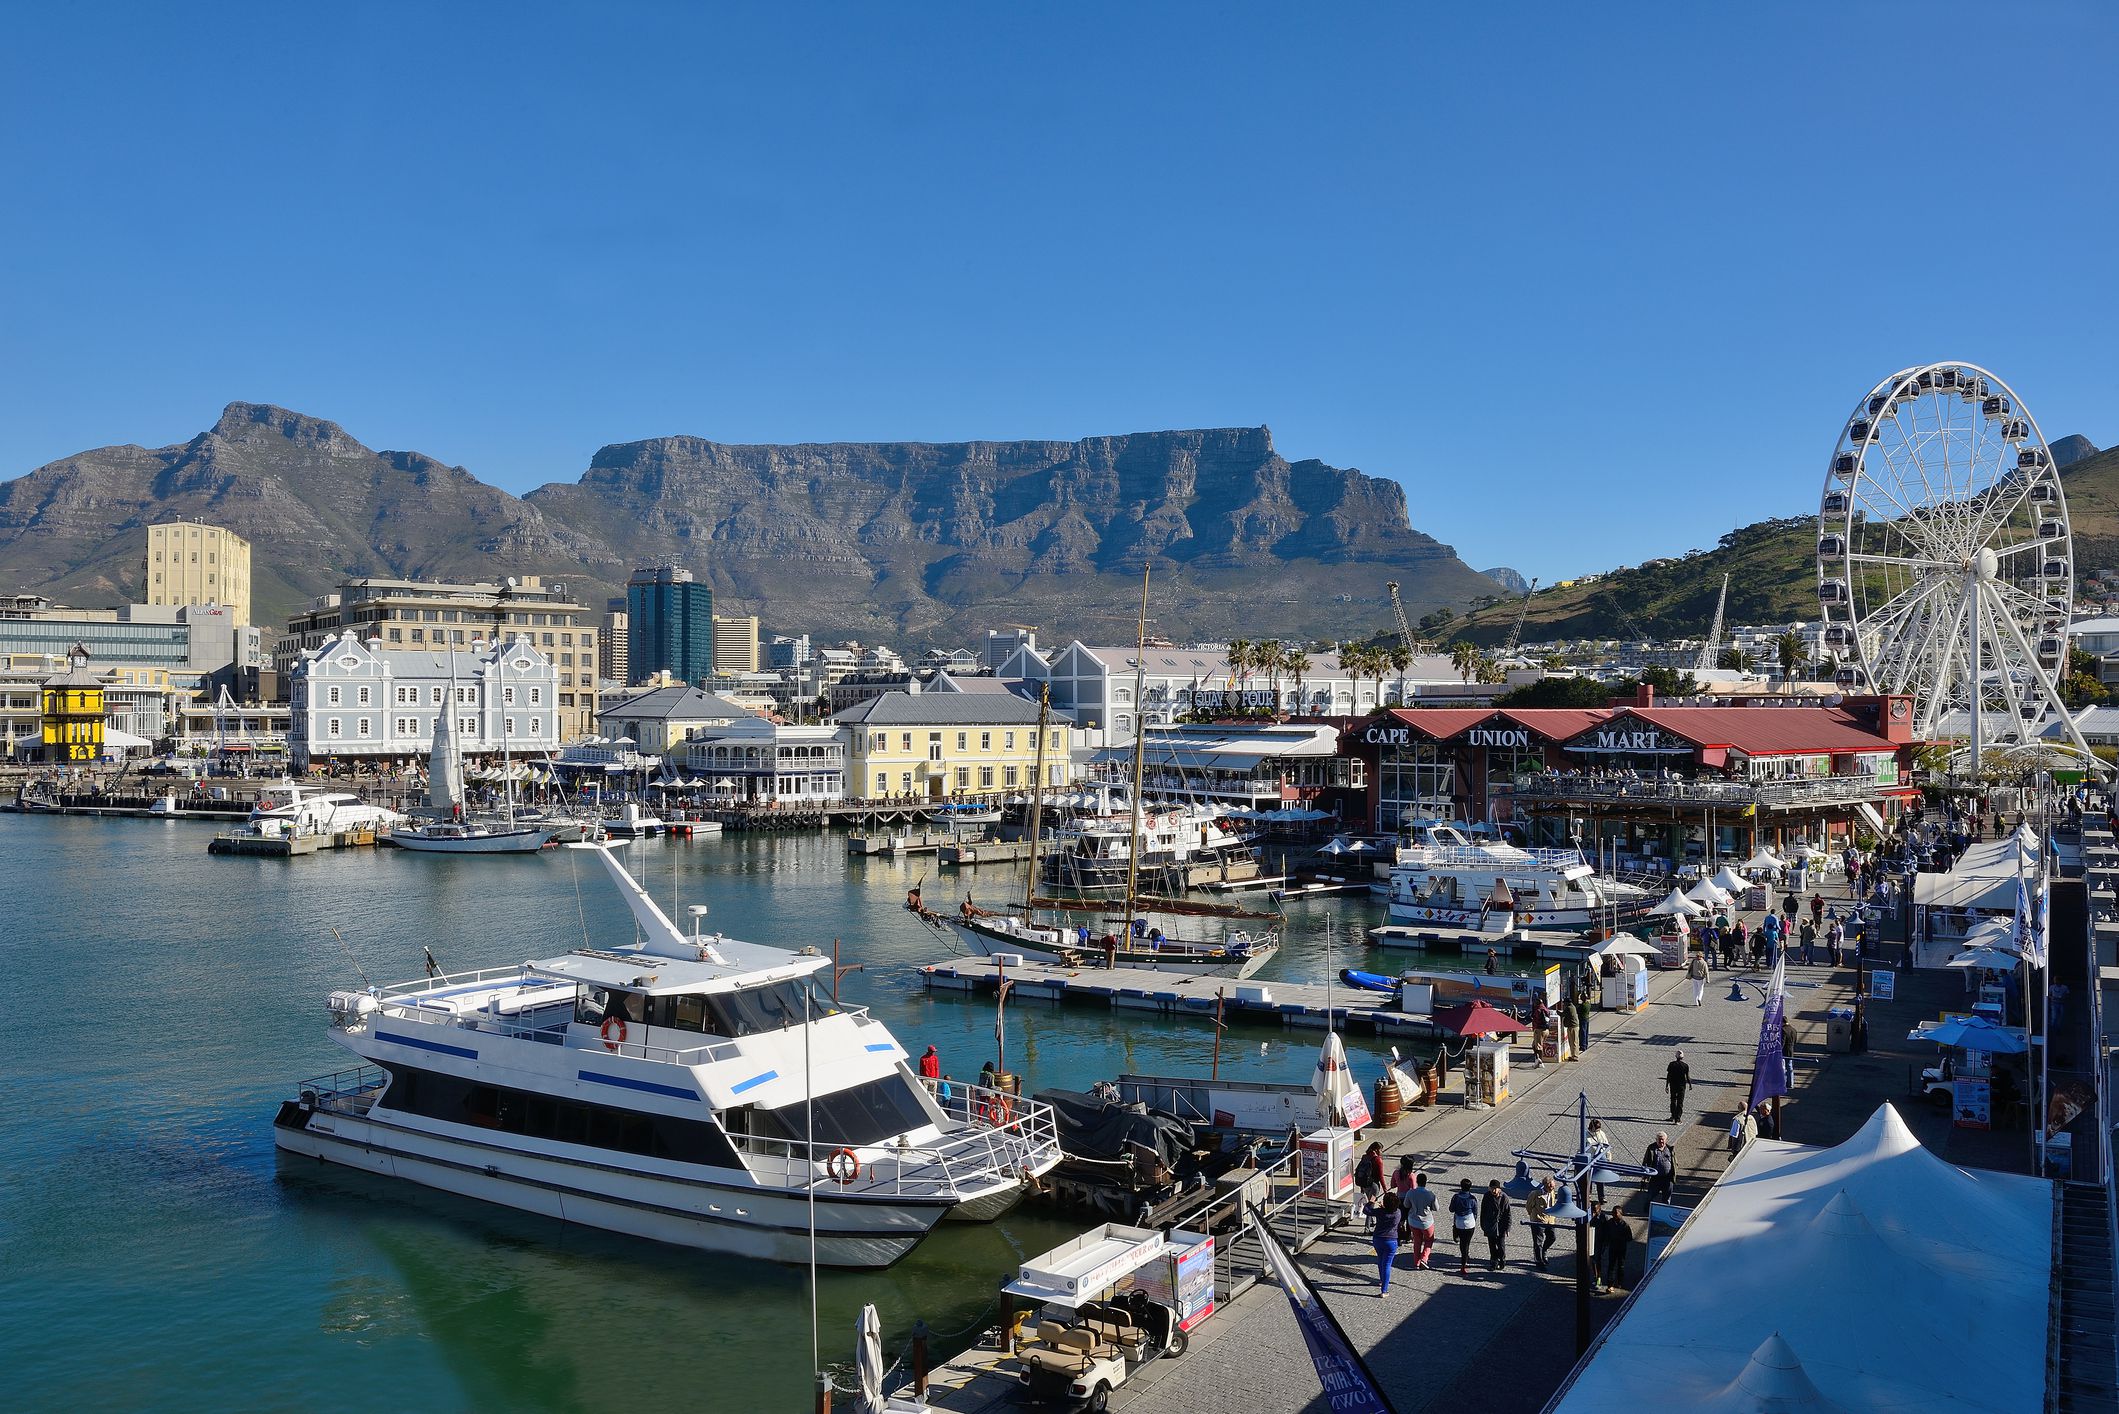 Stroll the V&A Waterfront